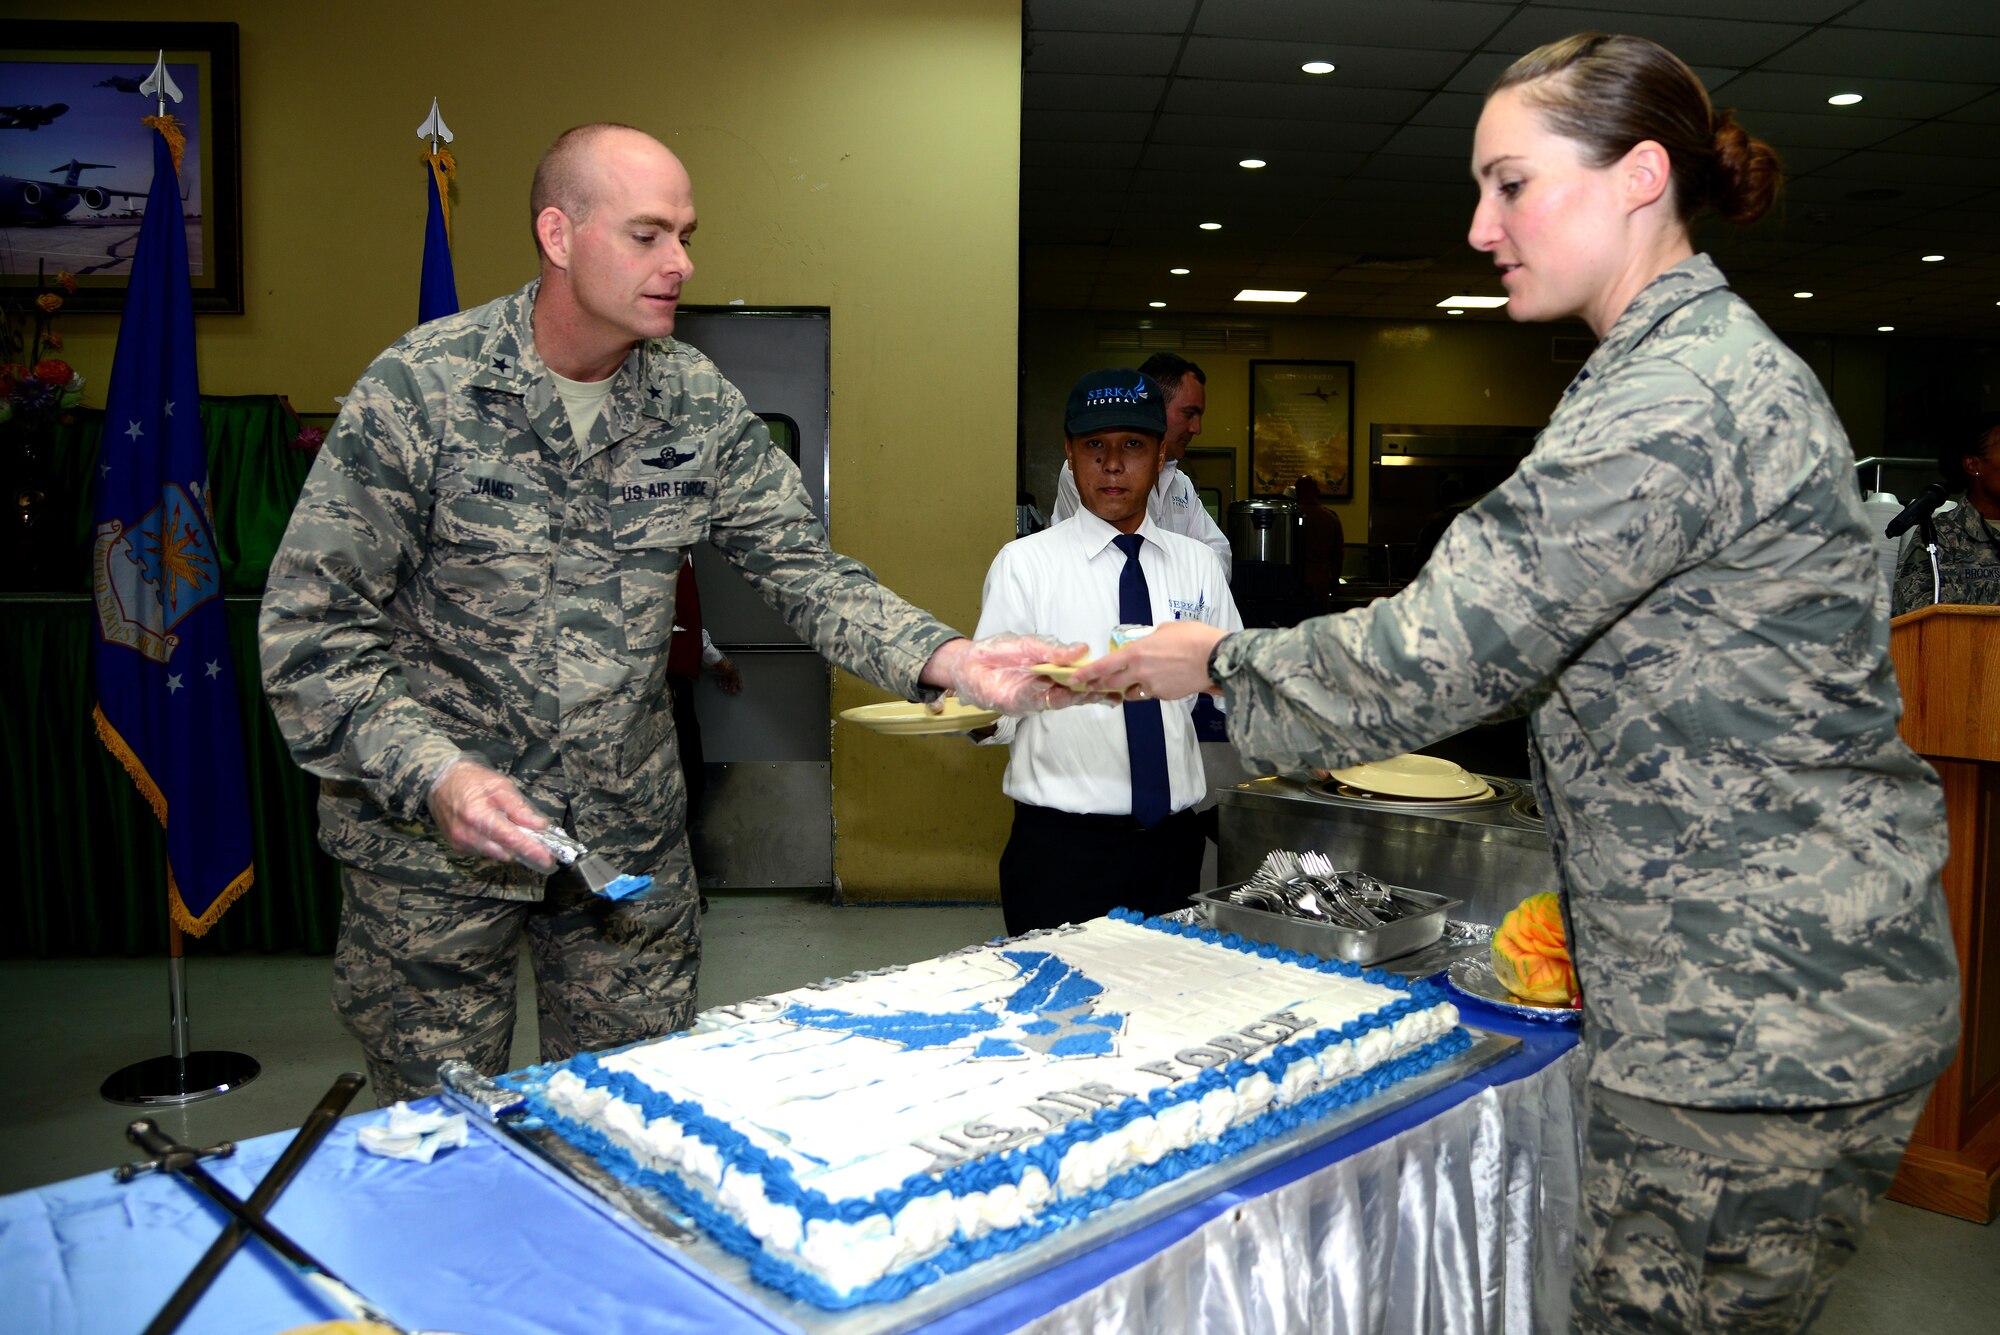 Brig. Gen. Darren James, 379th Air Expeditionary Wing commander, hands a piece of ceremonial cake to Capt. Christina MacDonald, 379th Expeditionary Forces Support Squadron community services flight commander, after cake cutting ceremony ends Sept. 18, 2015, at Al Udeid Air Base, Qatar. The cake cutting ceremony is traditionally performed by the oldest and youngest Airman. This year marks 68 years of military superiority through air power. (U.S. Air Force photo by Tech. Sgt. Rasheen Douglas)